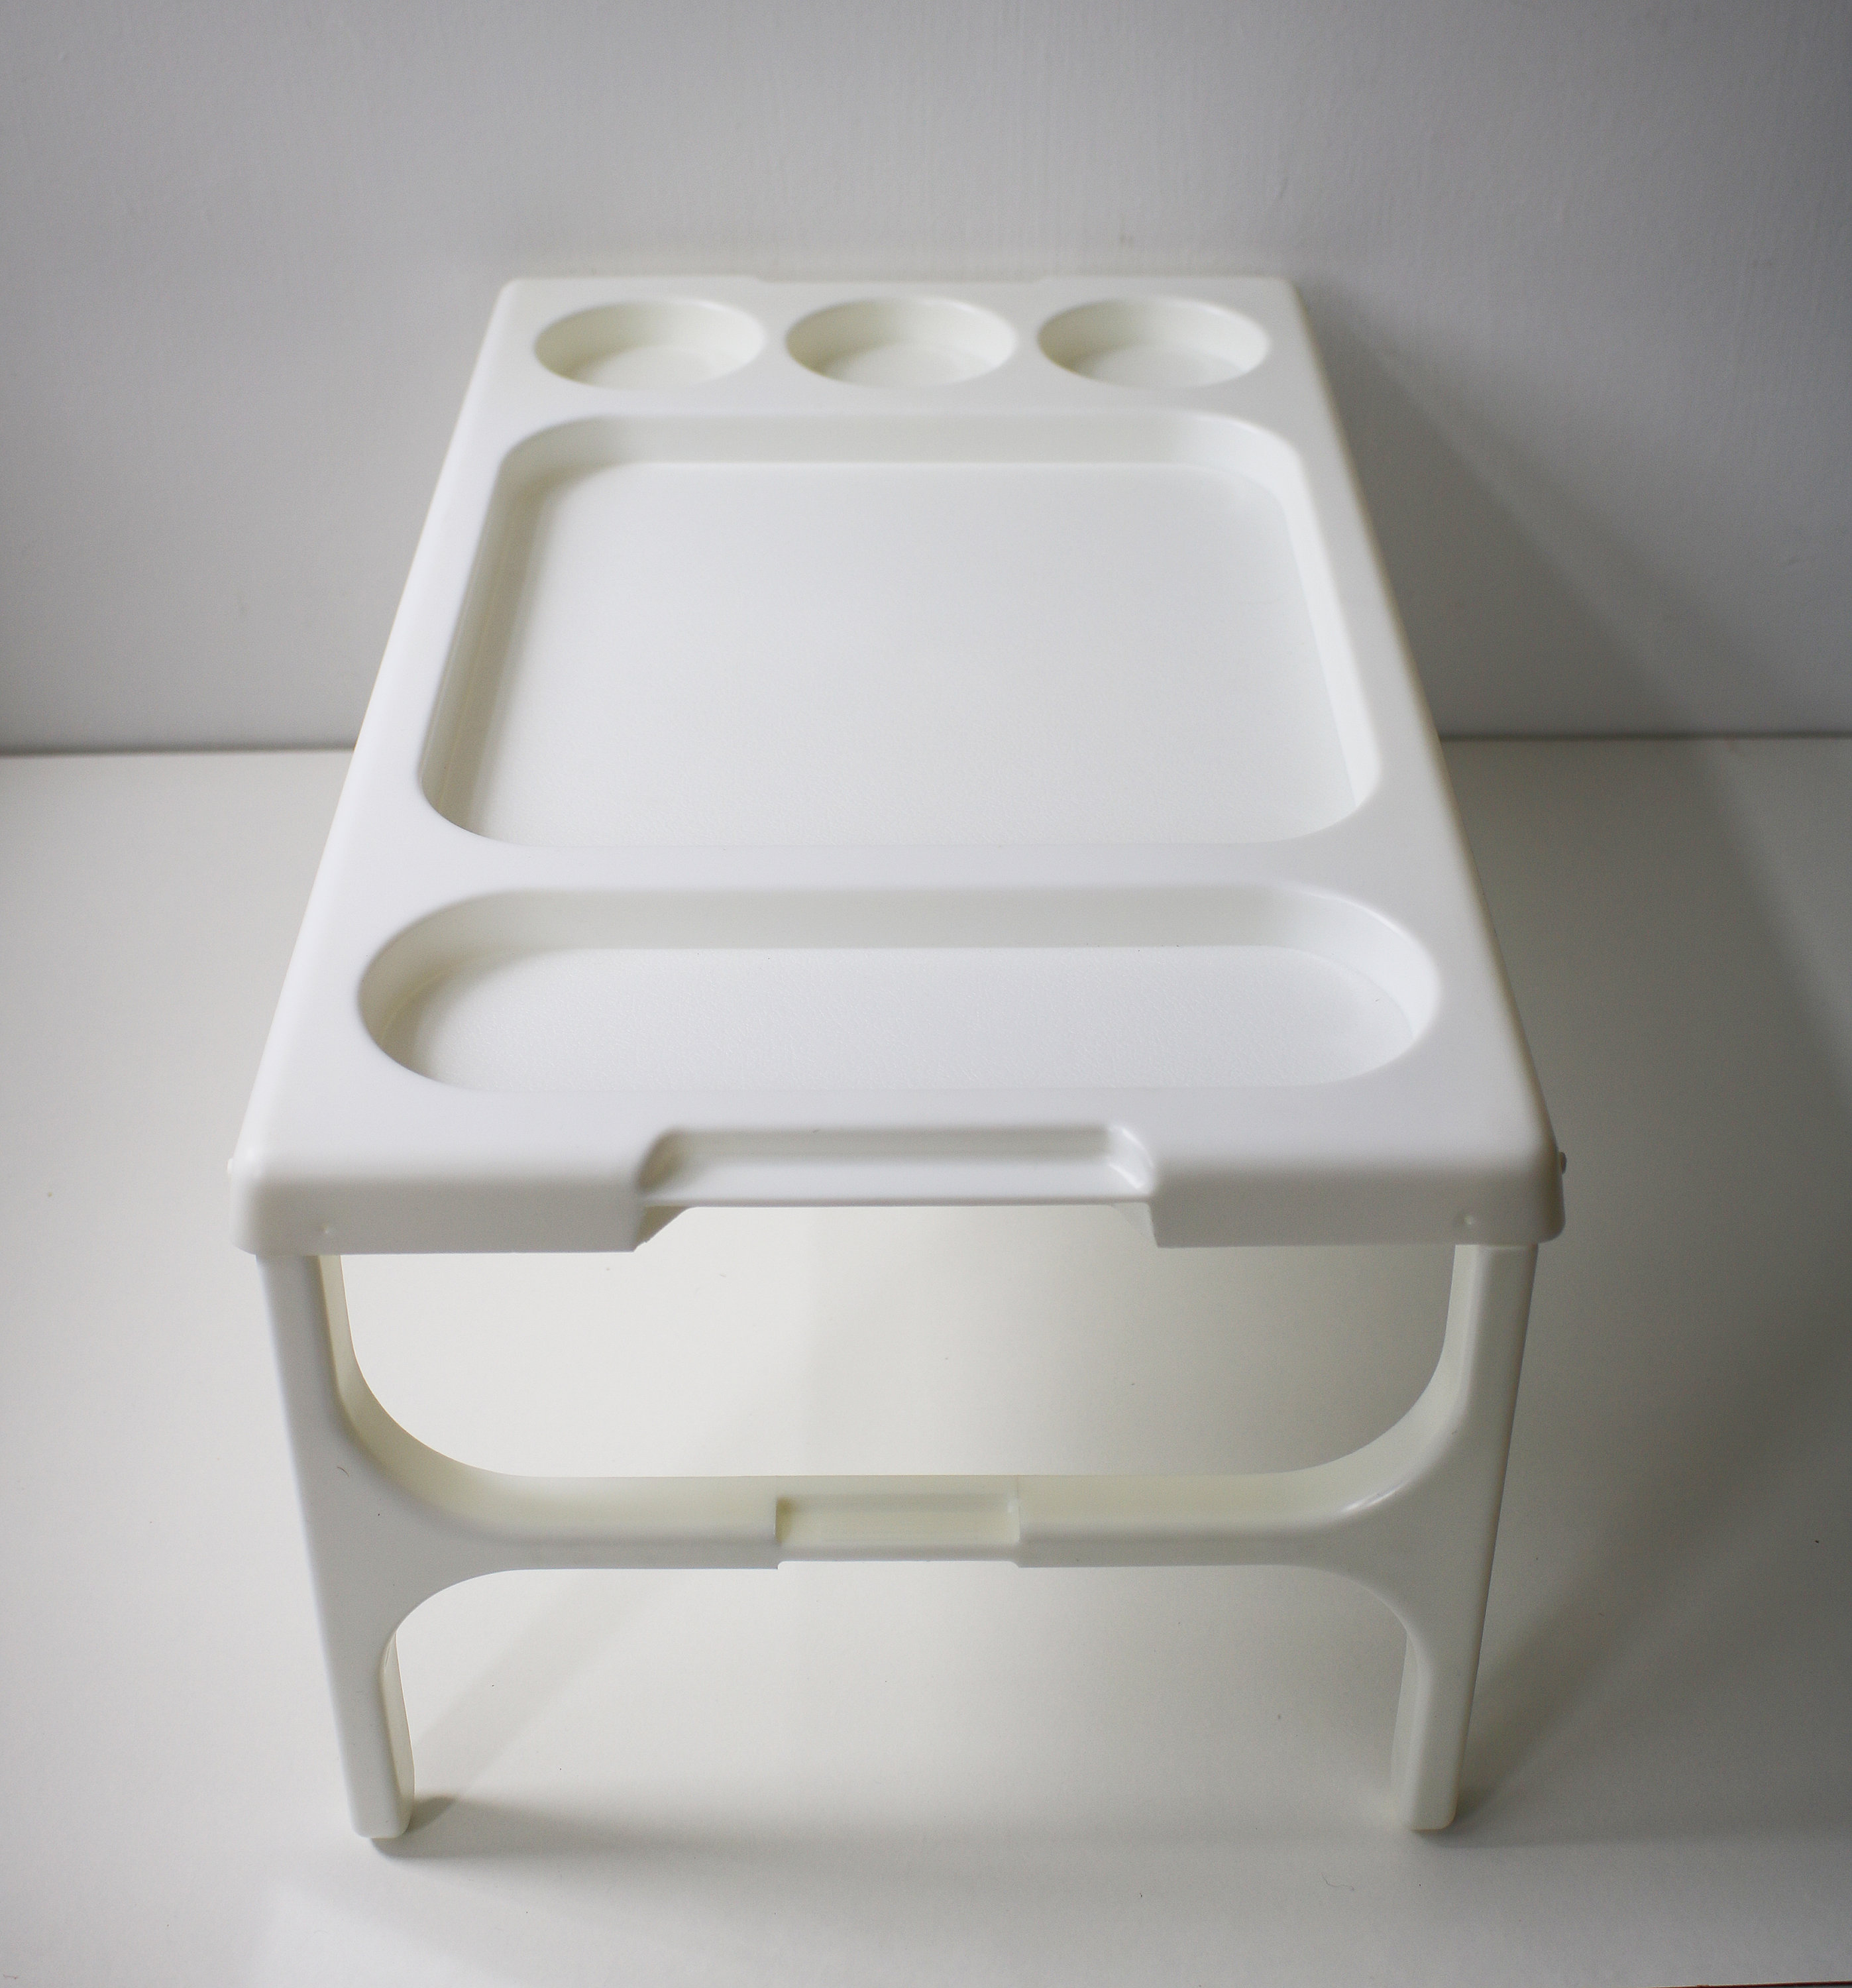 1980s folding plastic tray table designed by Henry C H Wang for Twopo